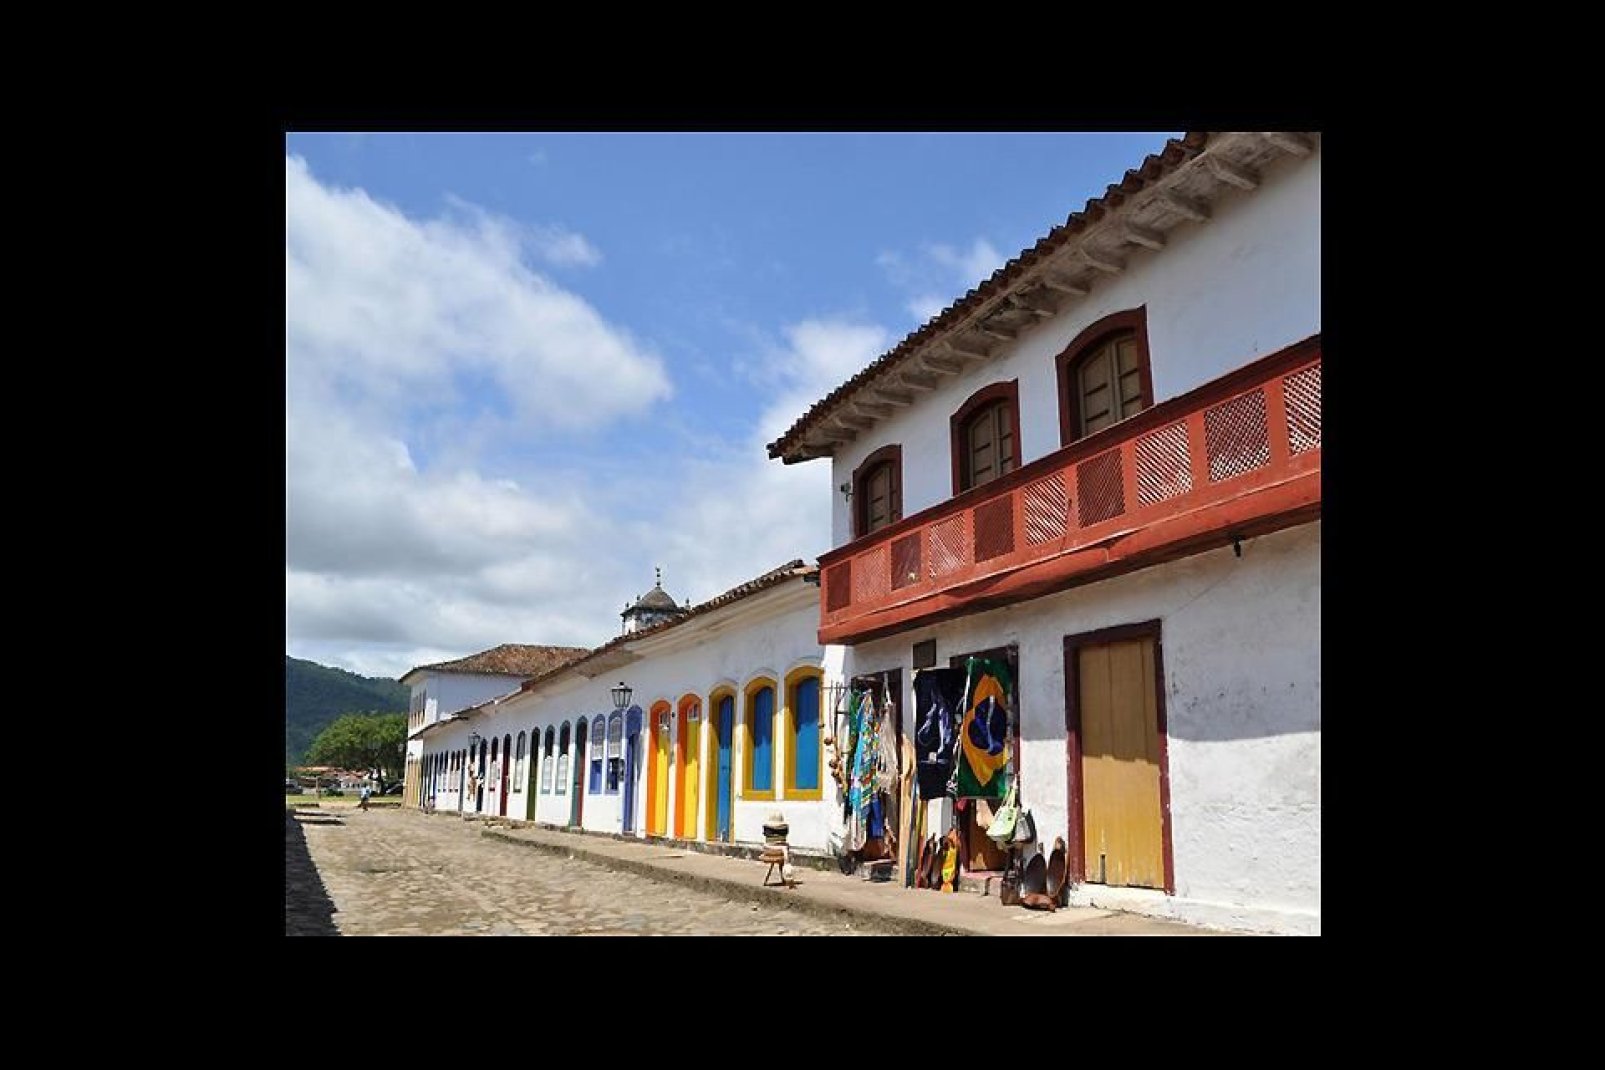 Capela de Santa Rita is the oldest church in Paraty. It was completed in 1722. This was the church of the white elite and freeman, former slaves